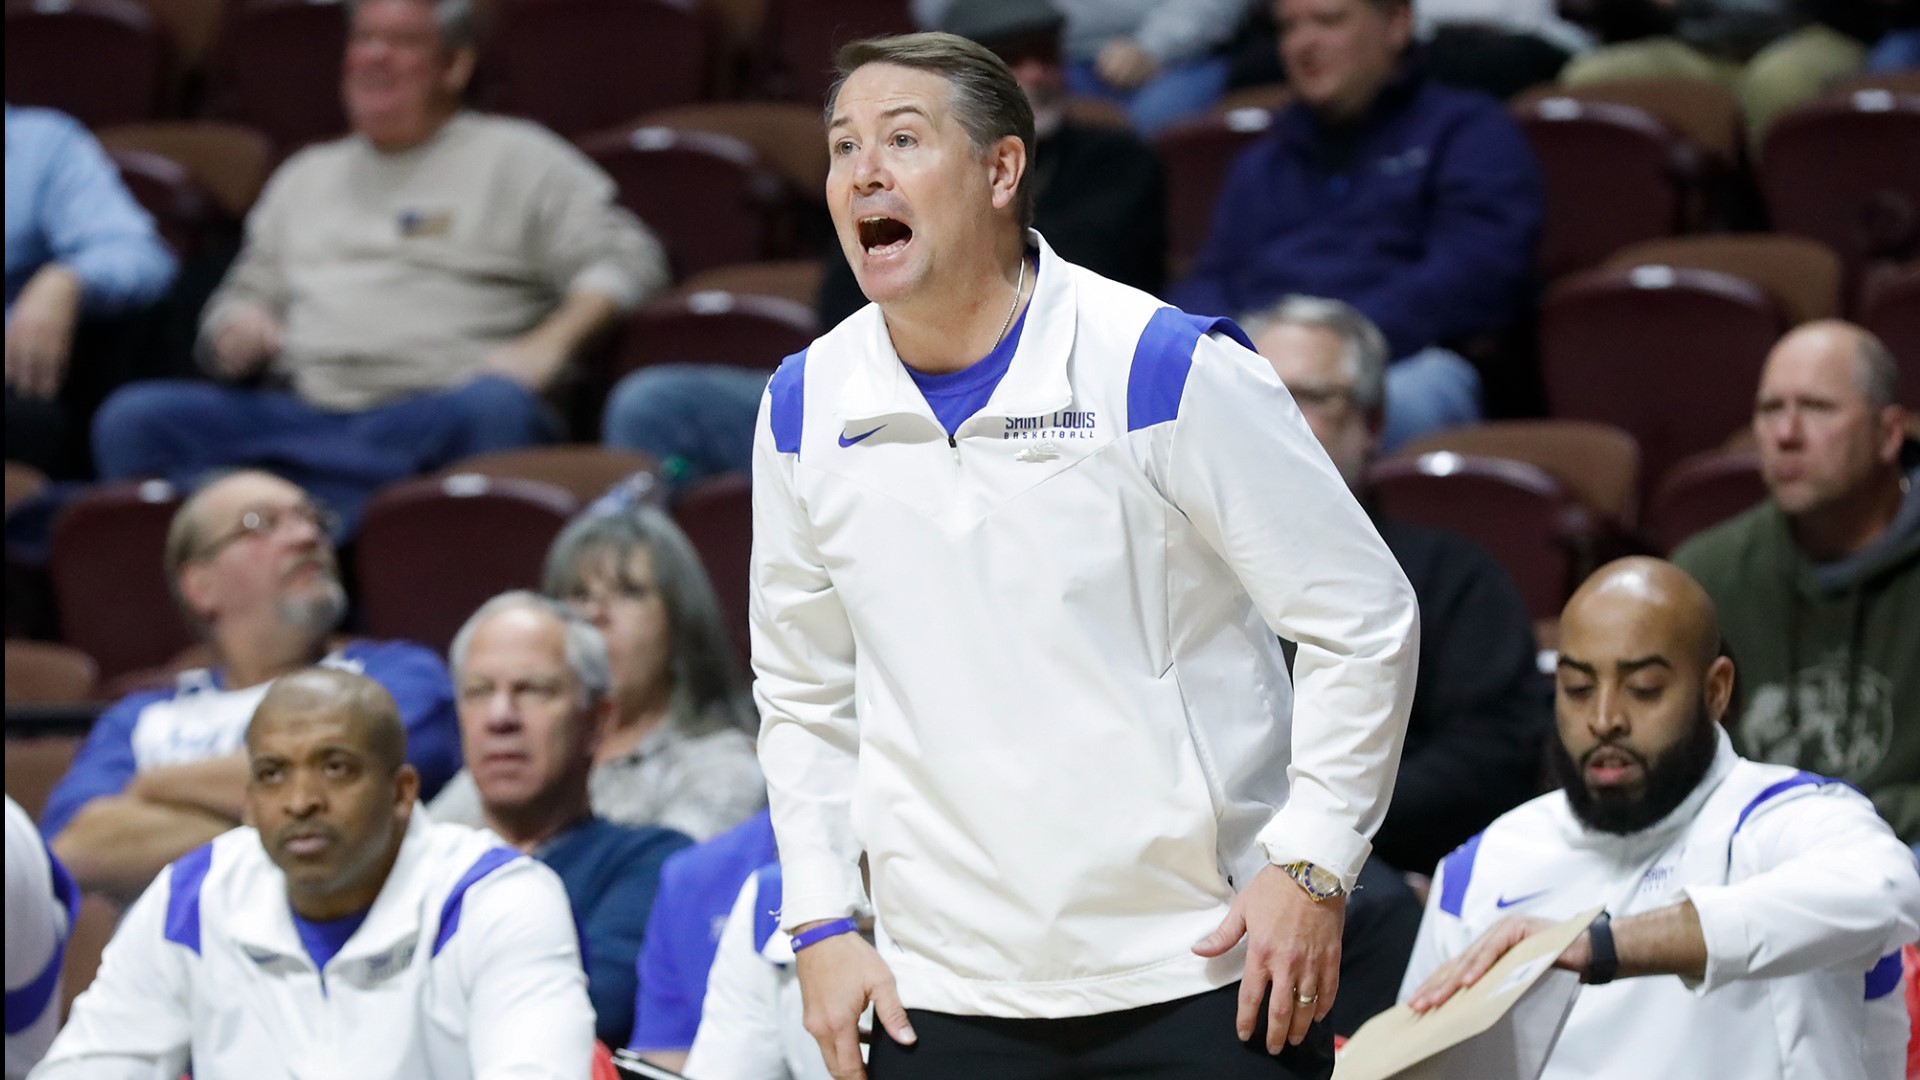 Travis Ford, the head coach of the Saint Louis Billikens mens basketball team for eight seasons, was fired Wednesday night following the team's loss to Duquesne.